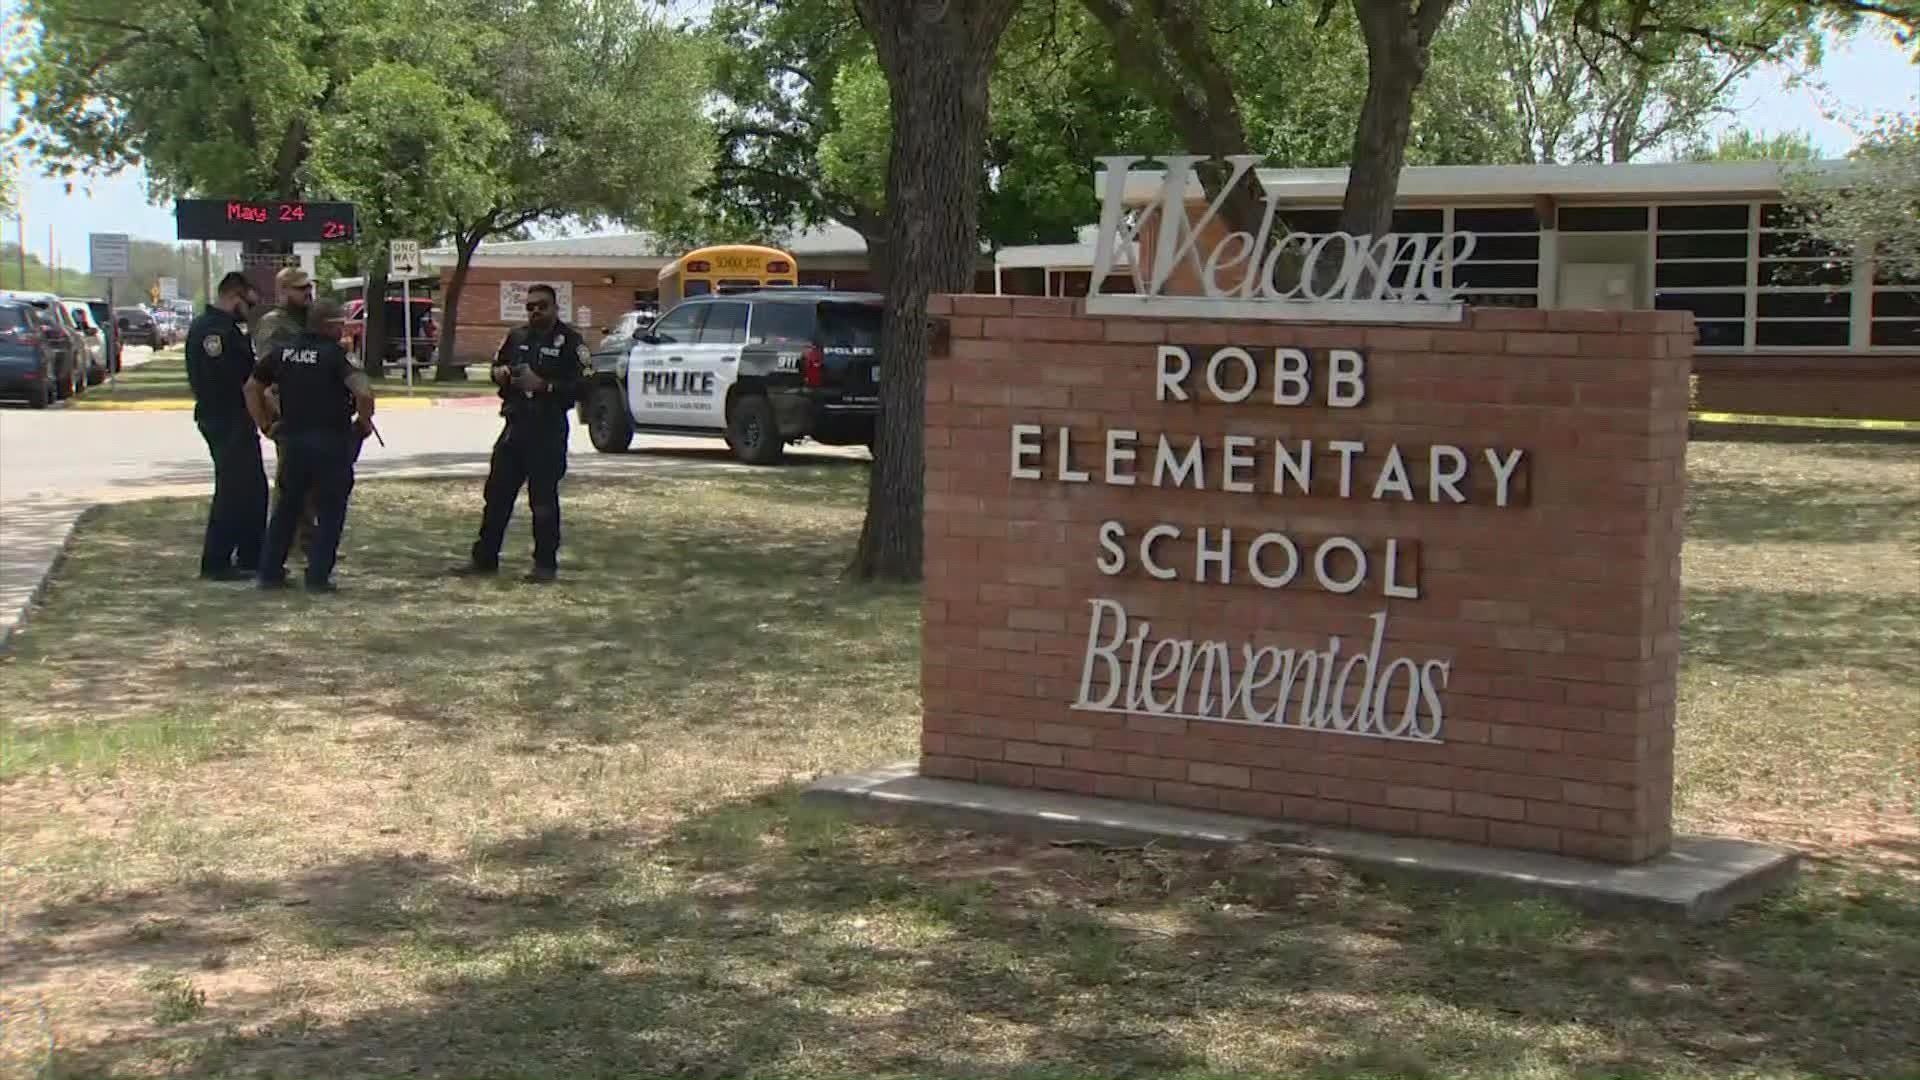 Authorities said 21 people were killed in the shooting at Robb Elementary School. The gunman, identified as Salvador Ramos, 18, was also killed.